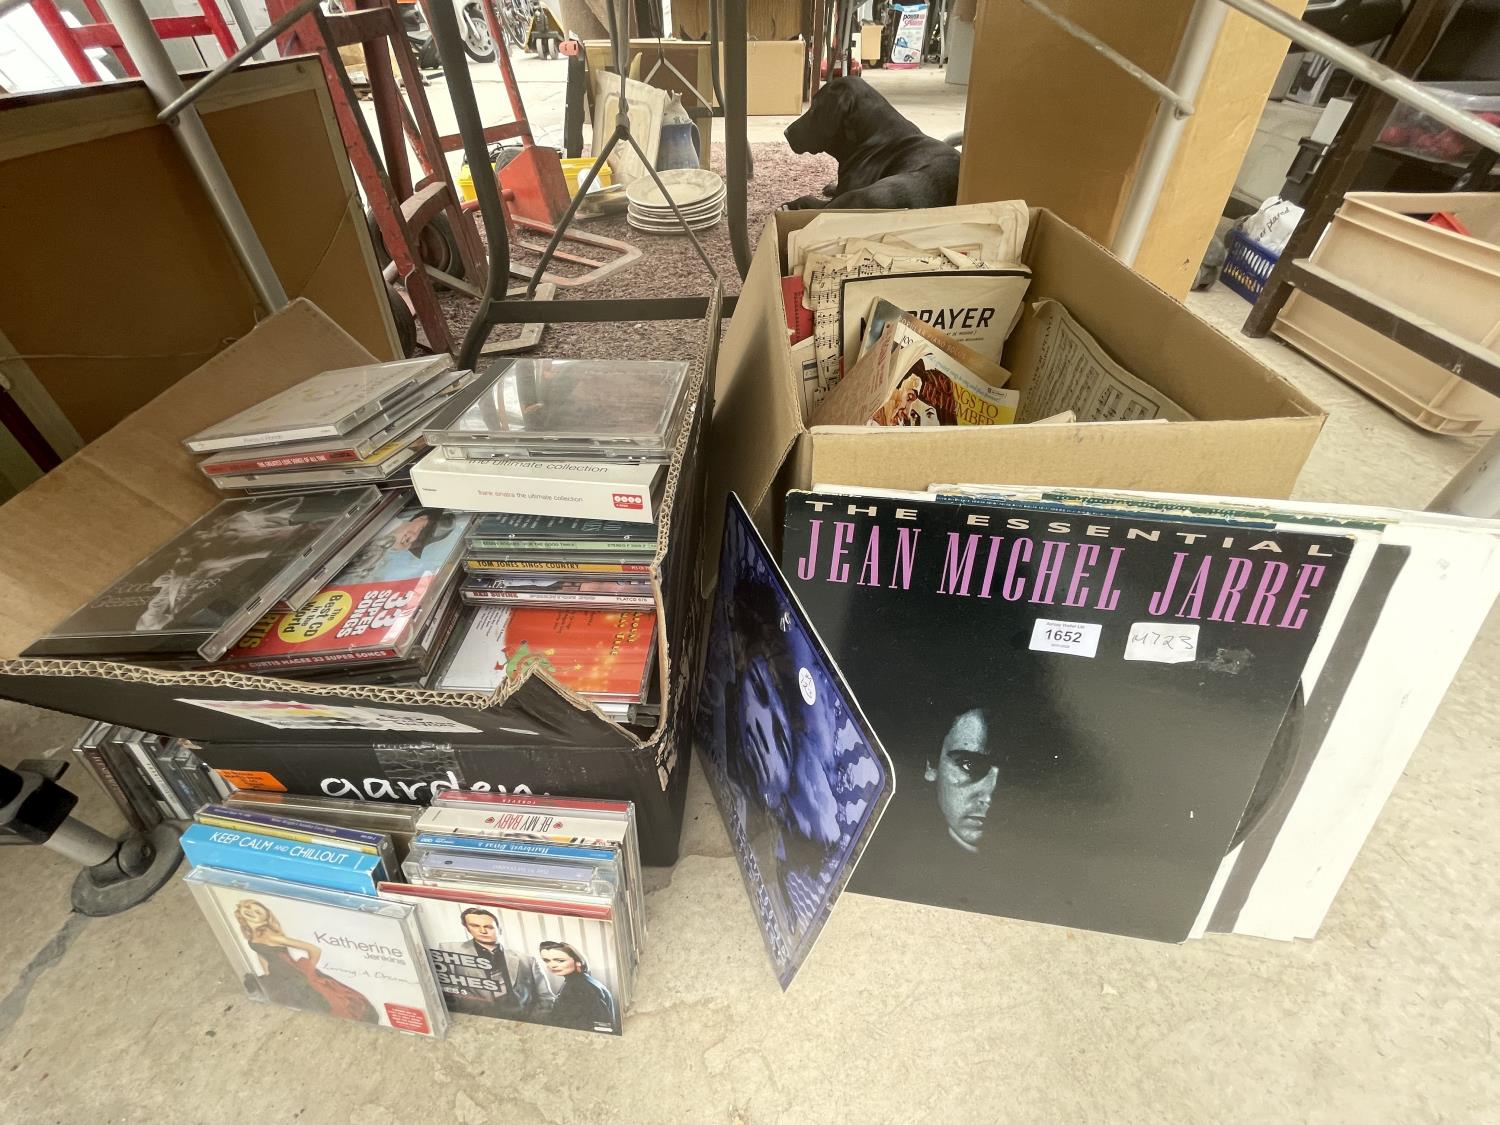 A LARGE QUANTITY OF RECORDS, CD'S ETC